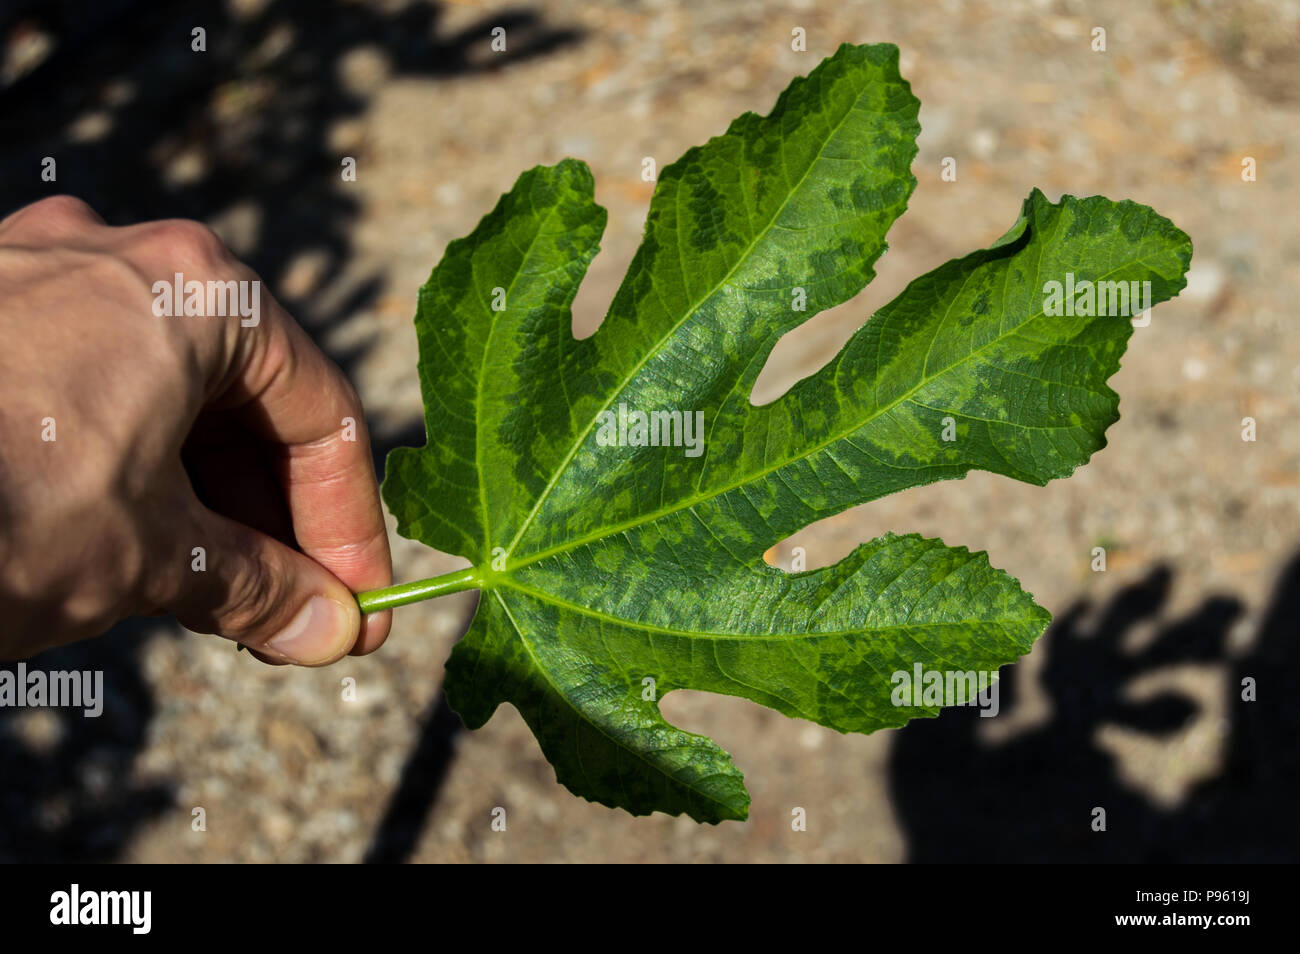 Hand of a man holding a leaf of a fig tree with white spots caused by an illness. Plants infected by fungi, bacteria or other diseases. Stock Photo